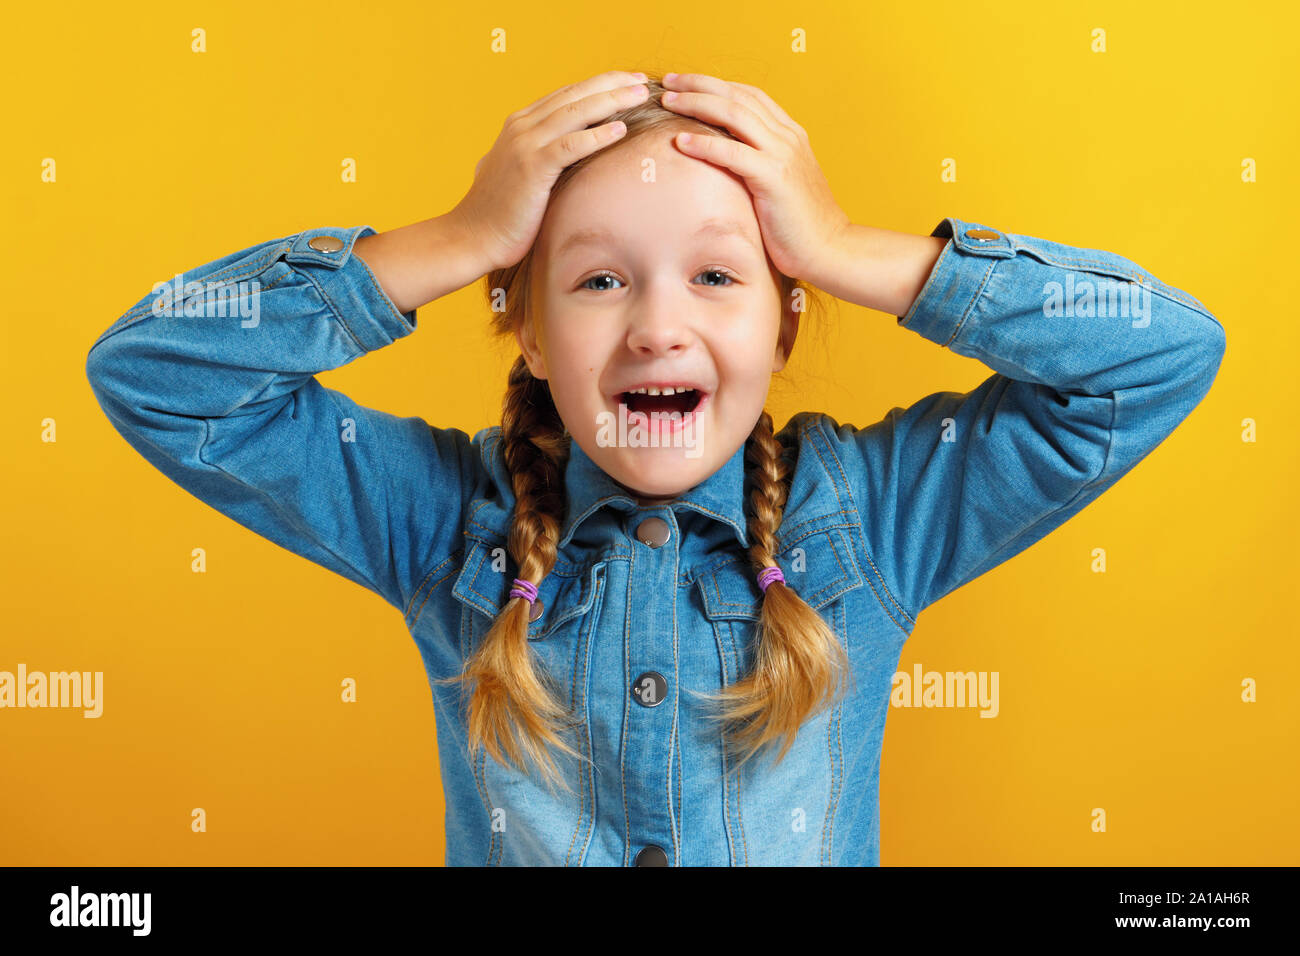 https://c8.alamy.com/comp/2A1AH6R/little-girl-holds-hands-behind-her-head-on-a-yellow-background-the-child-is-amazed-surprised-emotional-2A1AH6R.jpg